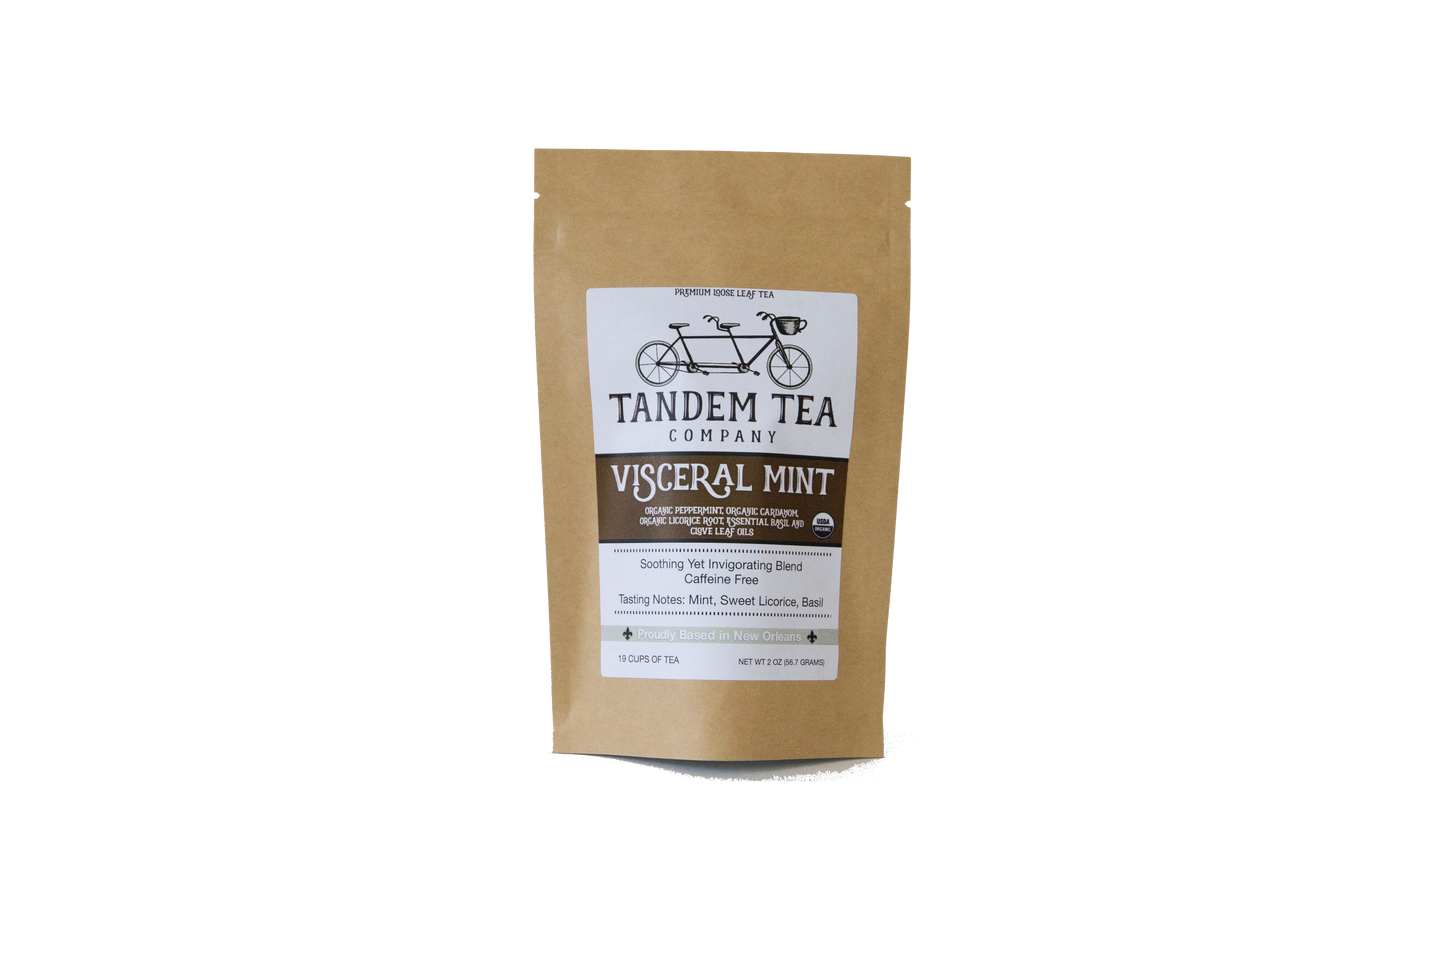 Visceral Mint | Organic Herbal Tea with Mint, Cardamom, Licorice, Basil, and Clove Tandem Tea Company Packaging